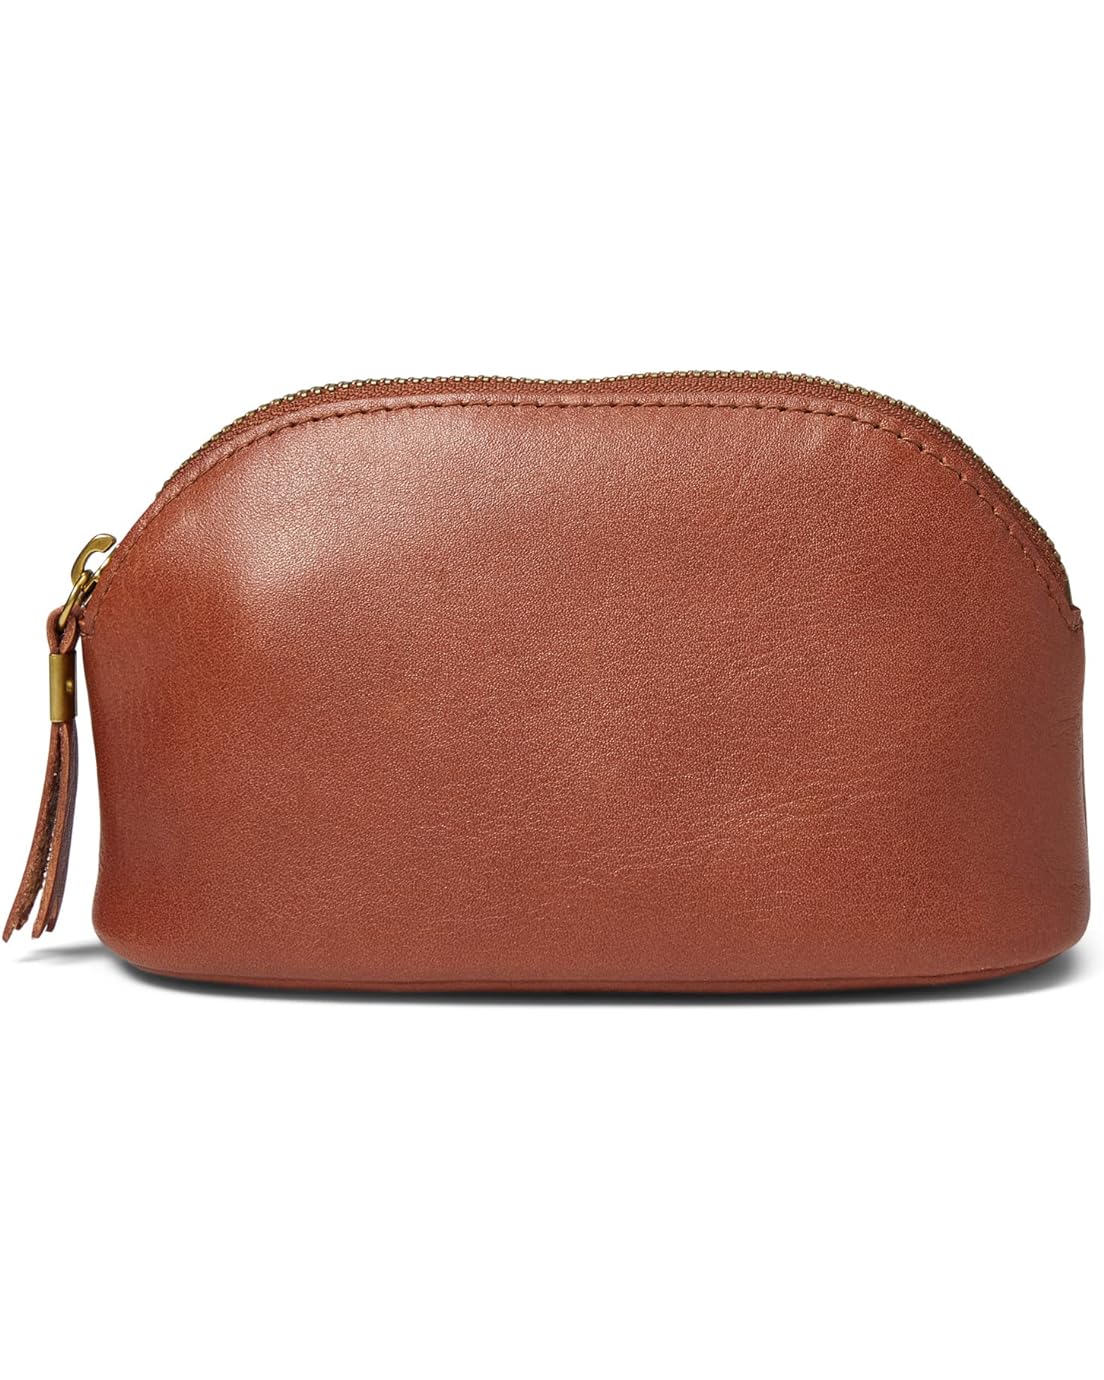 Madewell The Leather Makeup Pouch